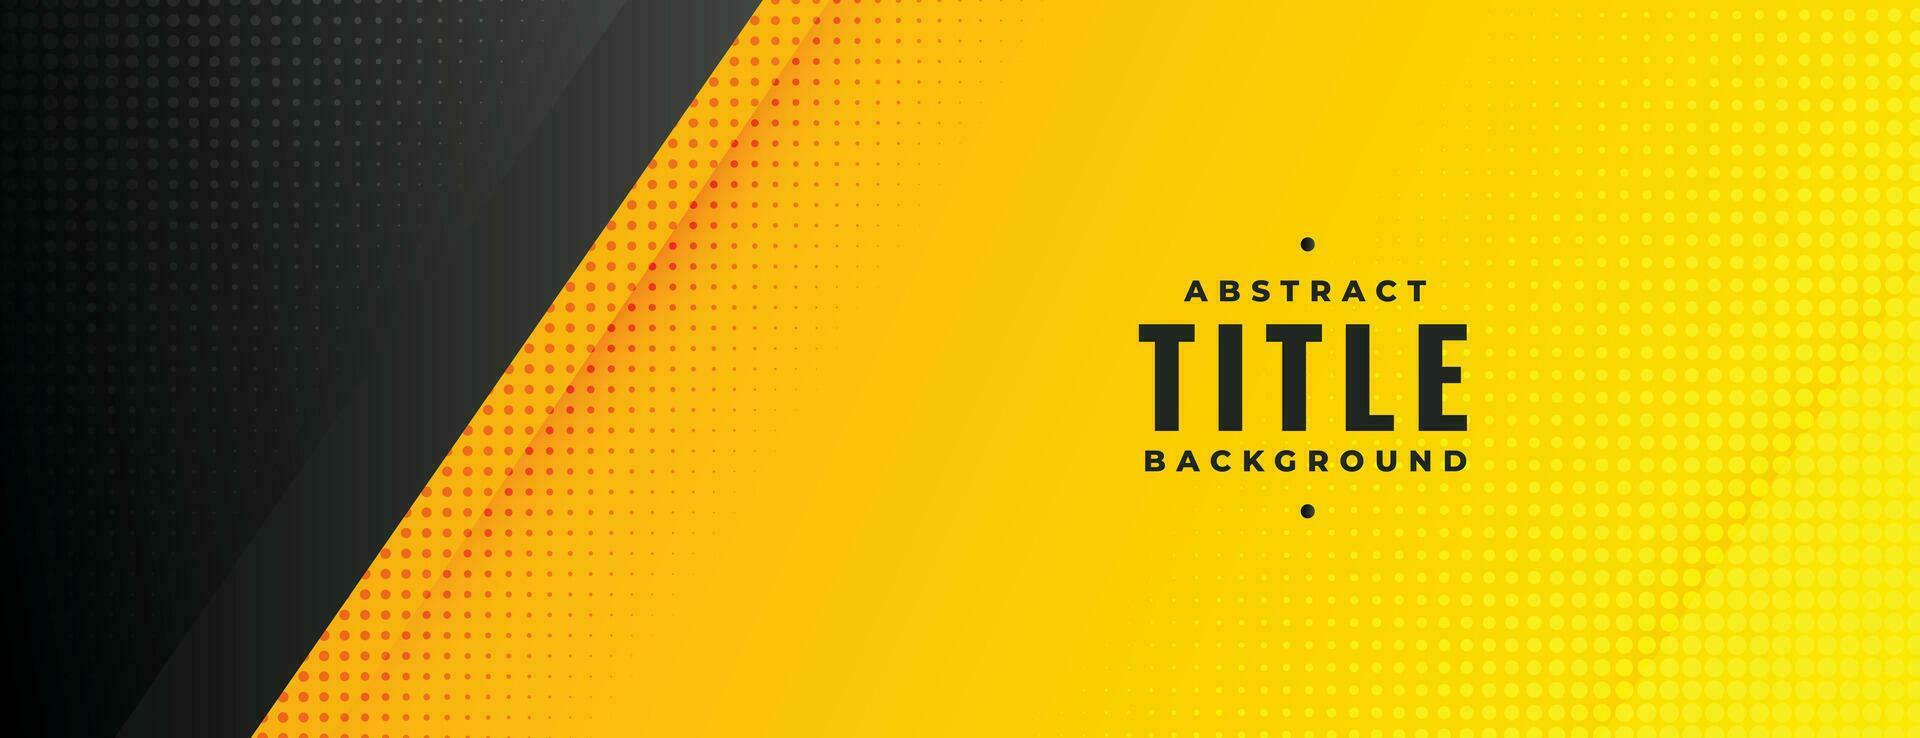 black and yellow modern wide halftone banner vector